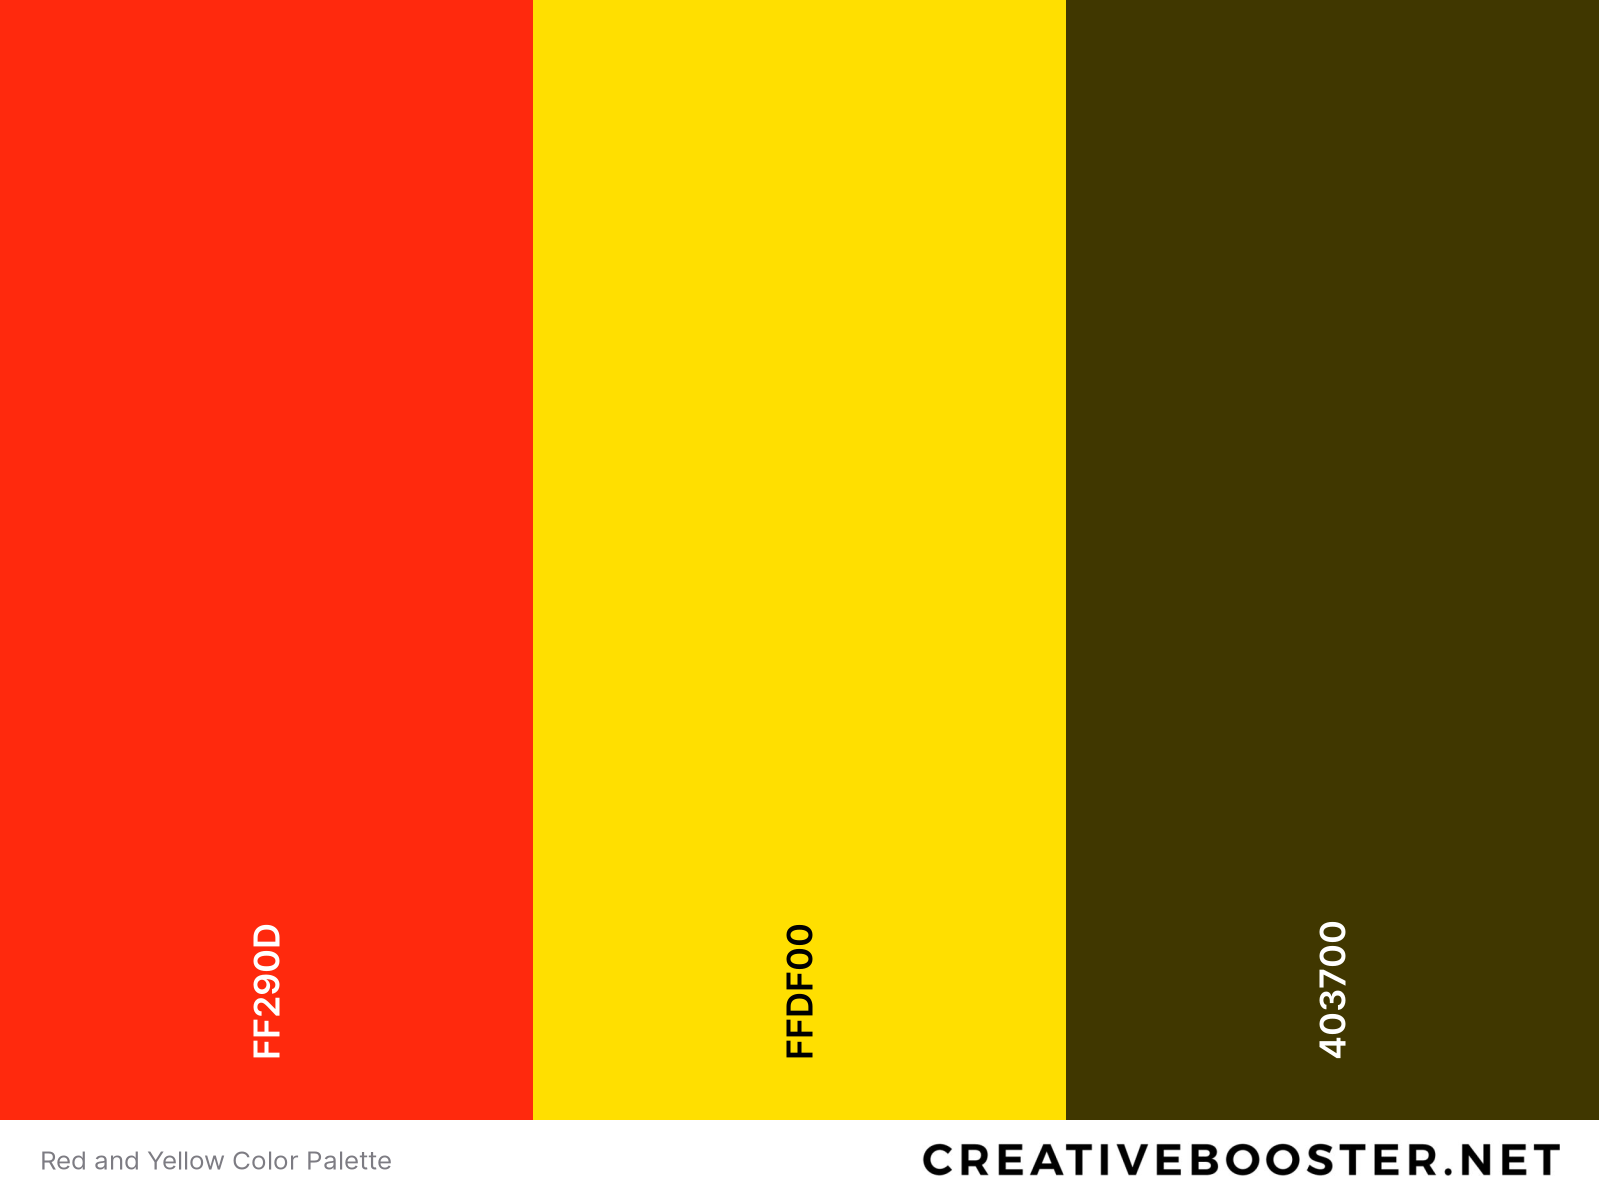 Red and Yellow Color Palette